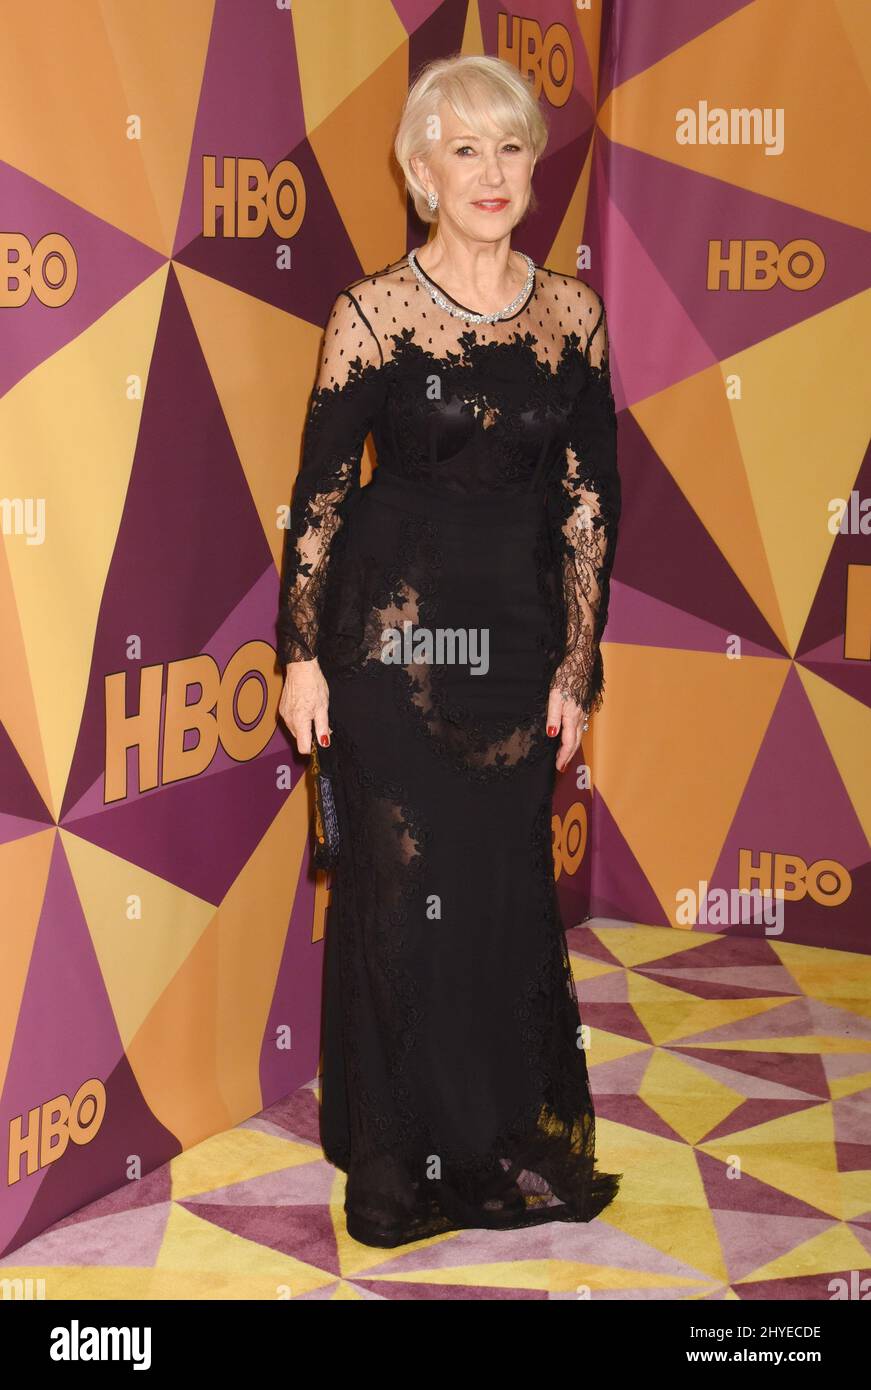 Helen Mirren at HBO's 'Golden Globe Awards' After Party held at the Beverly Hilton Hotel on January 7, 2018 in Beverly Hills, CA. Stock Photo